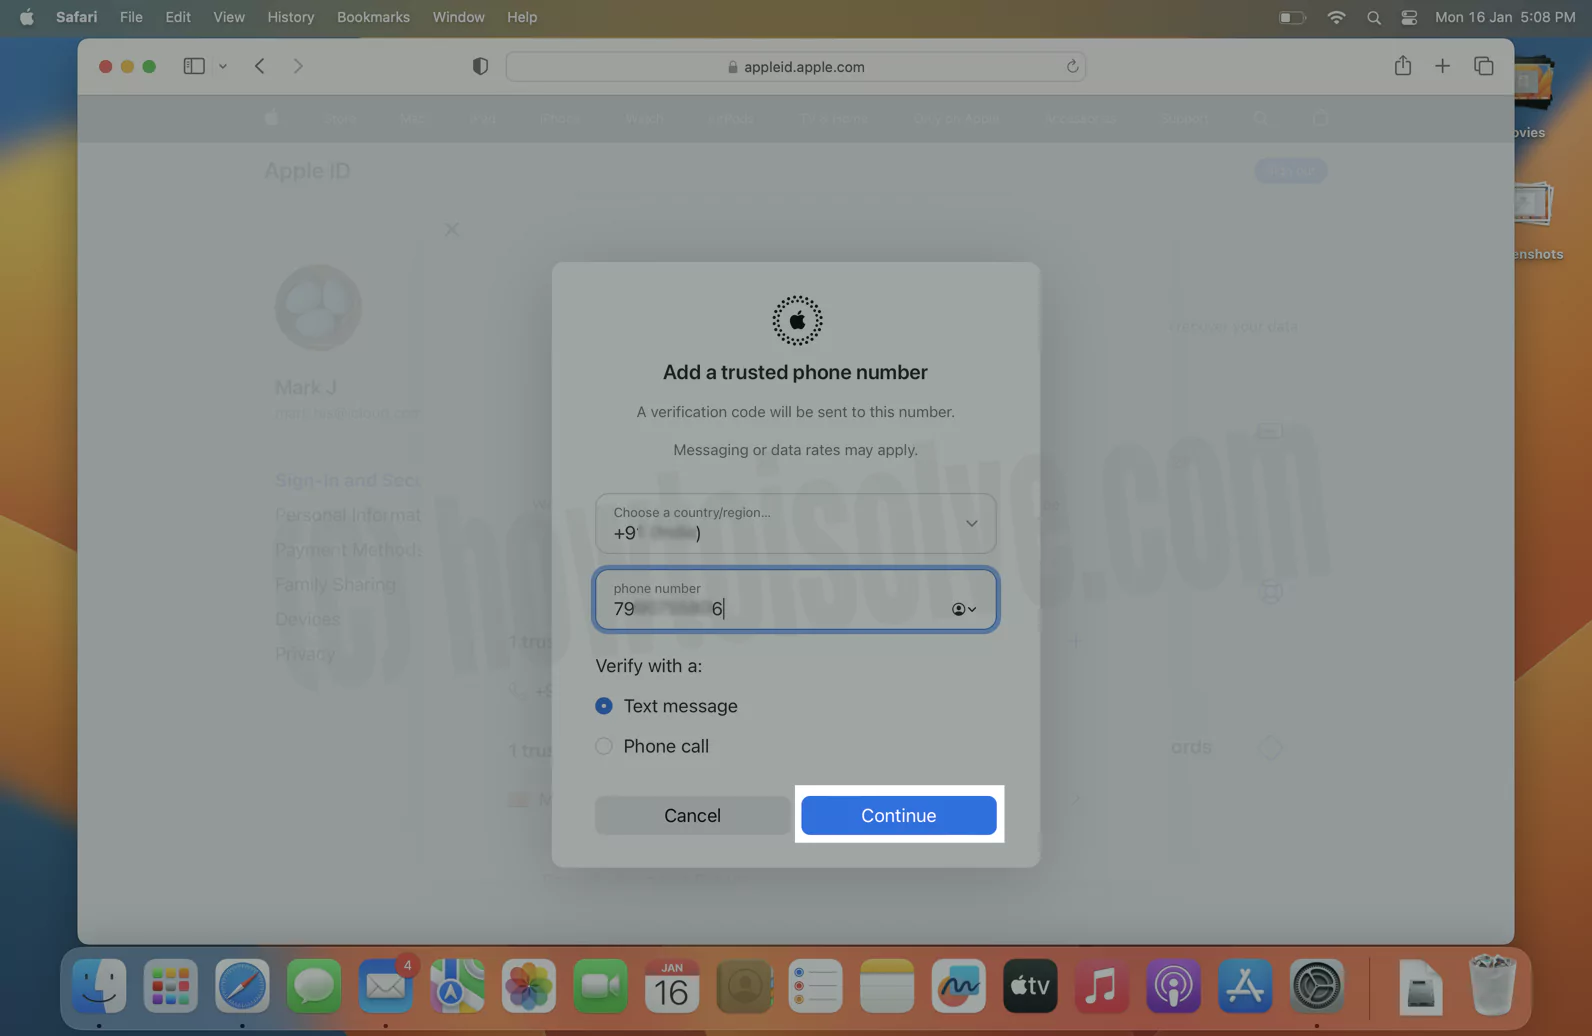 enter-phone-number-in-apple-id-account